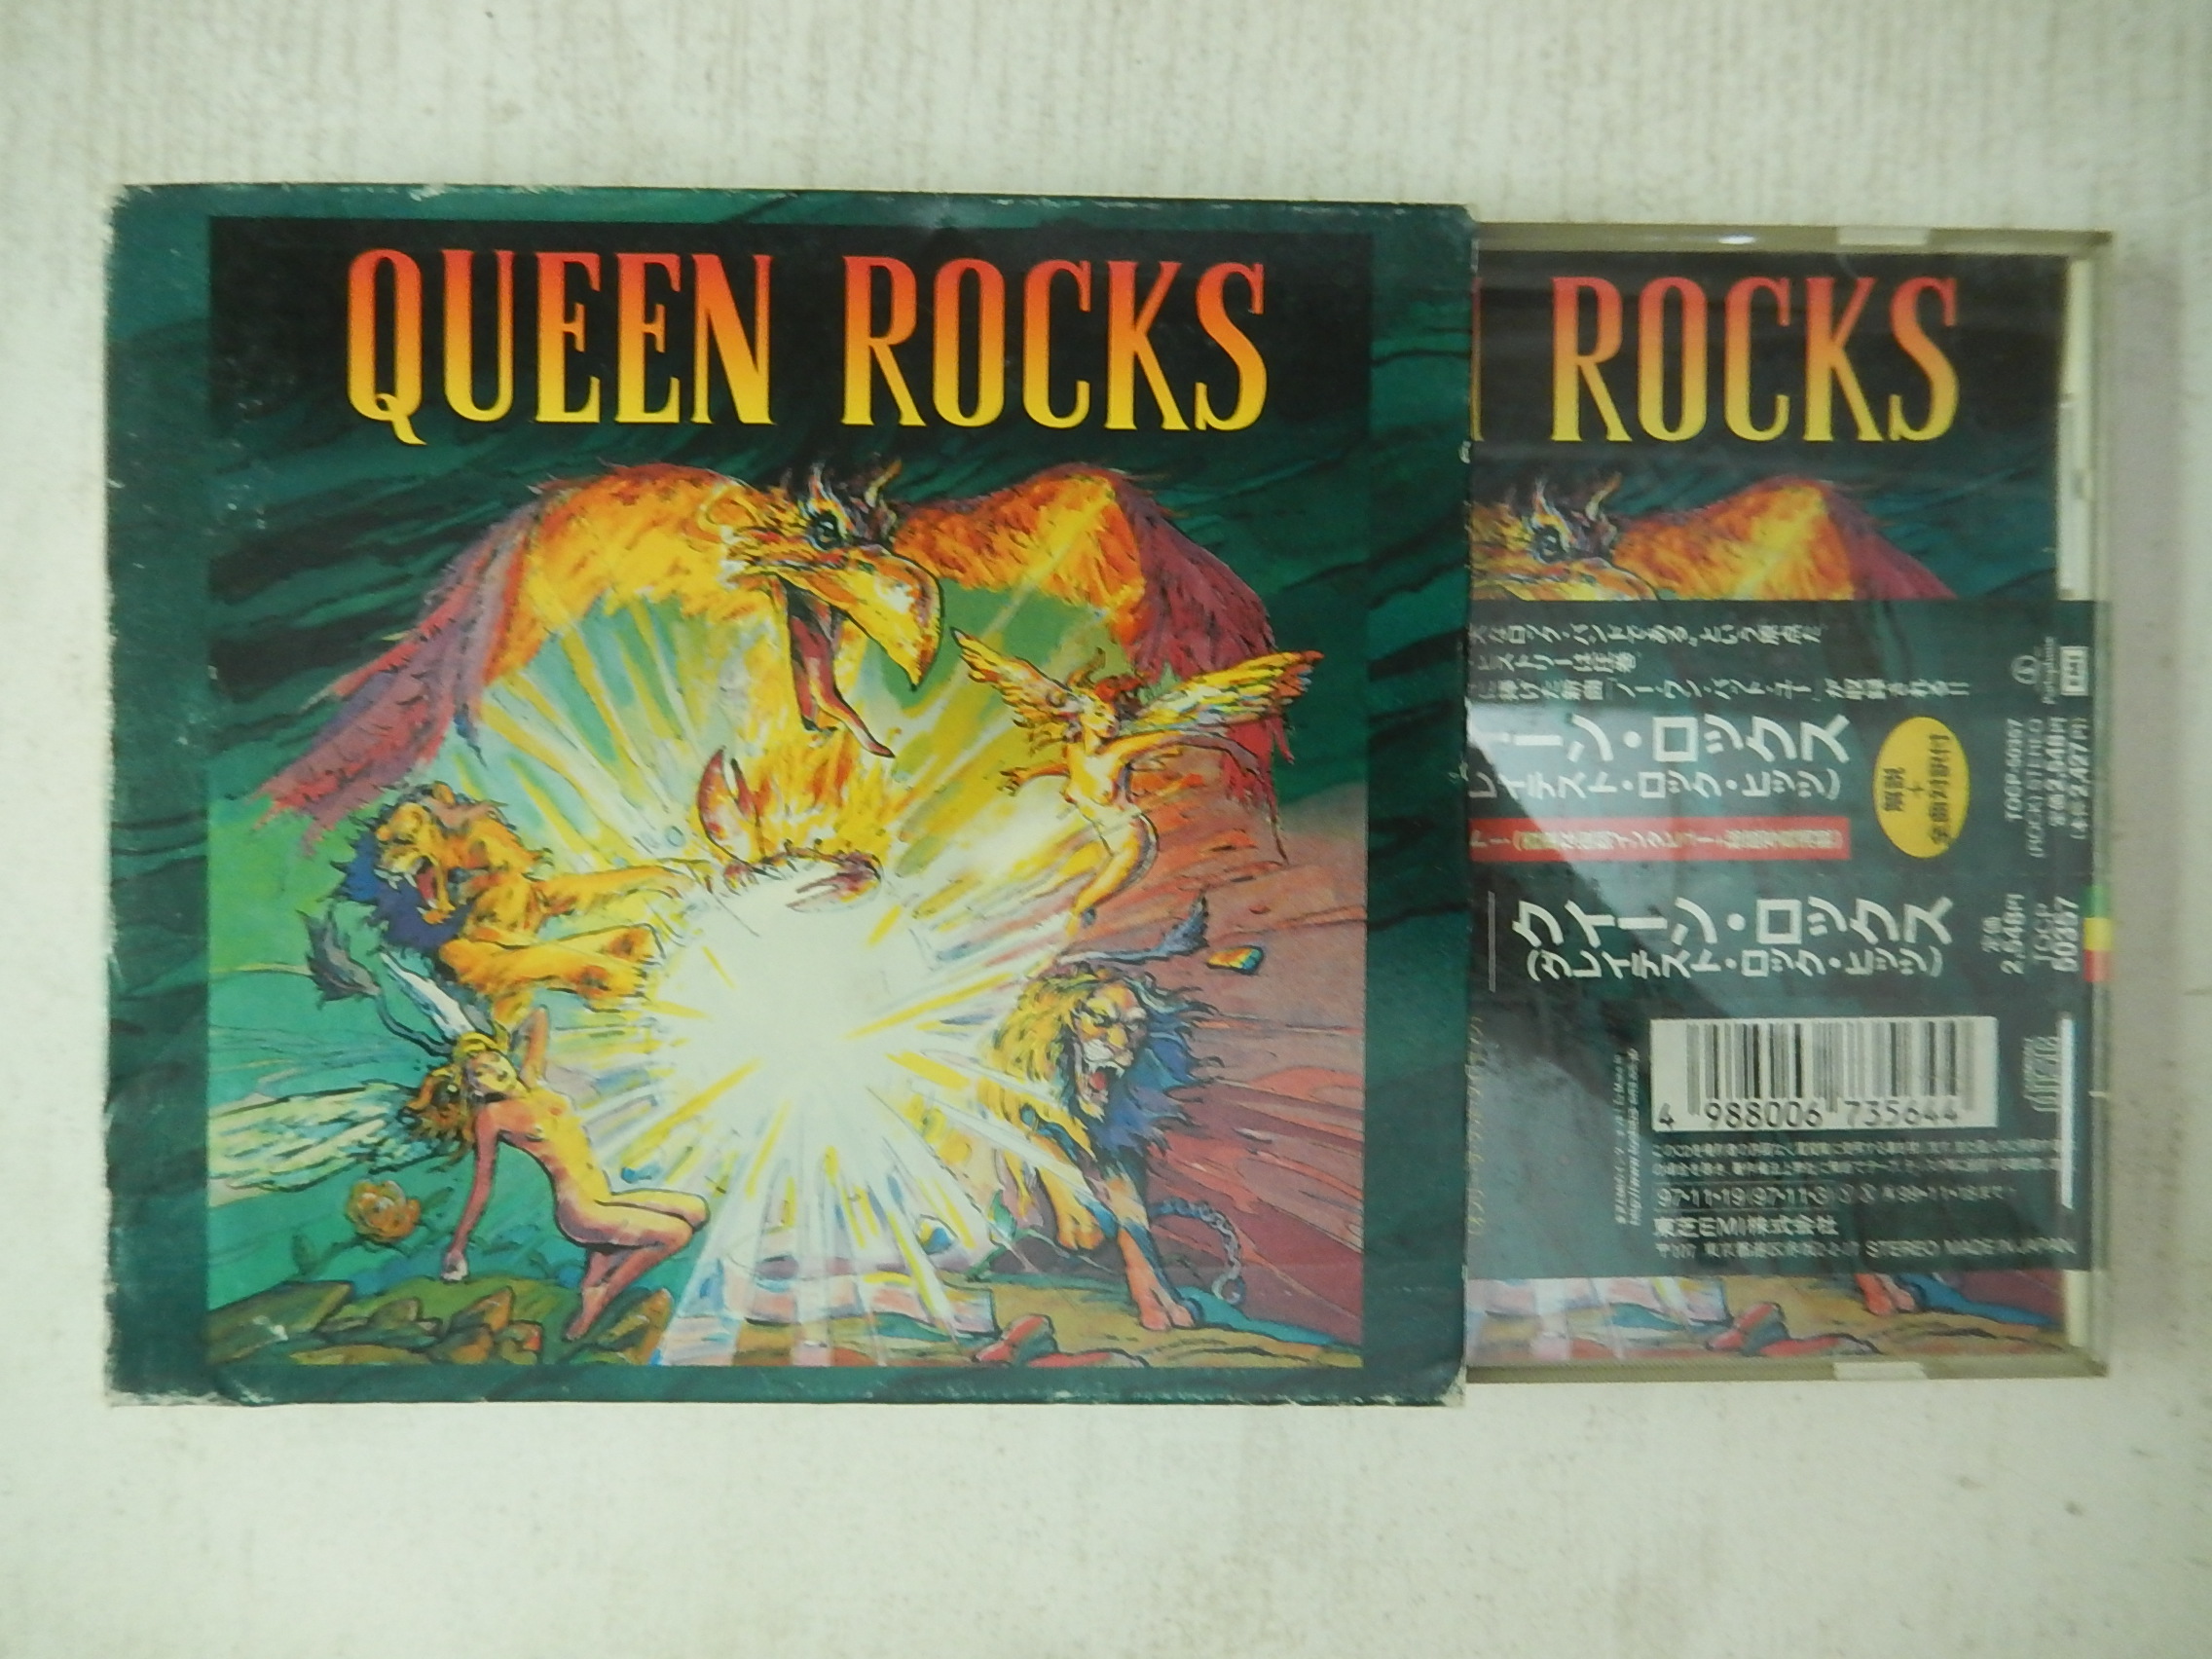 Genuine CD classic rock queen with sidebar